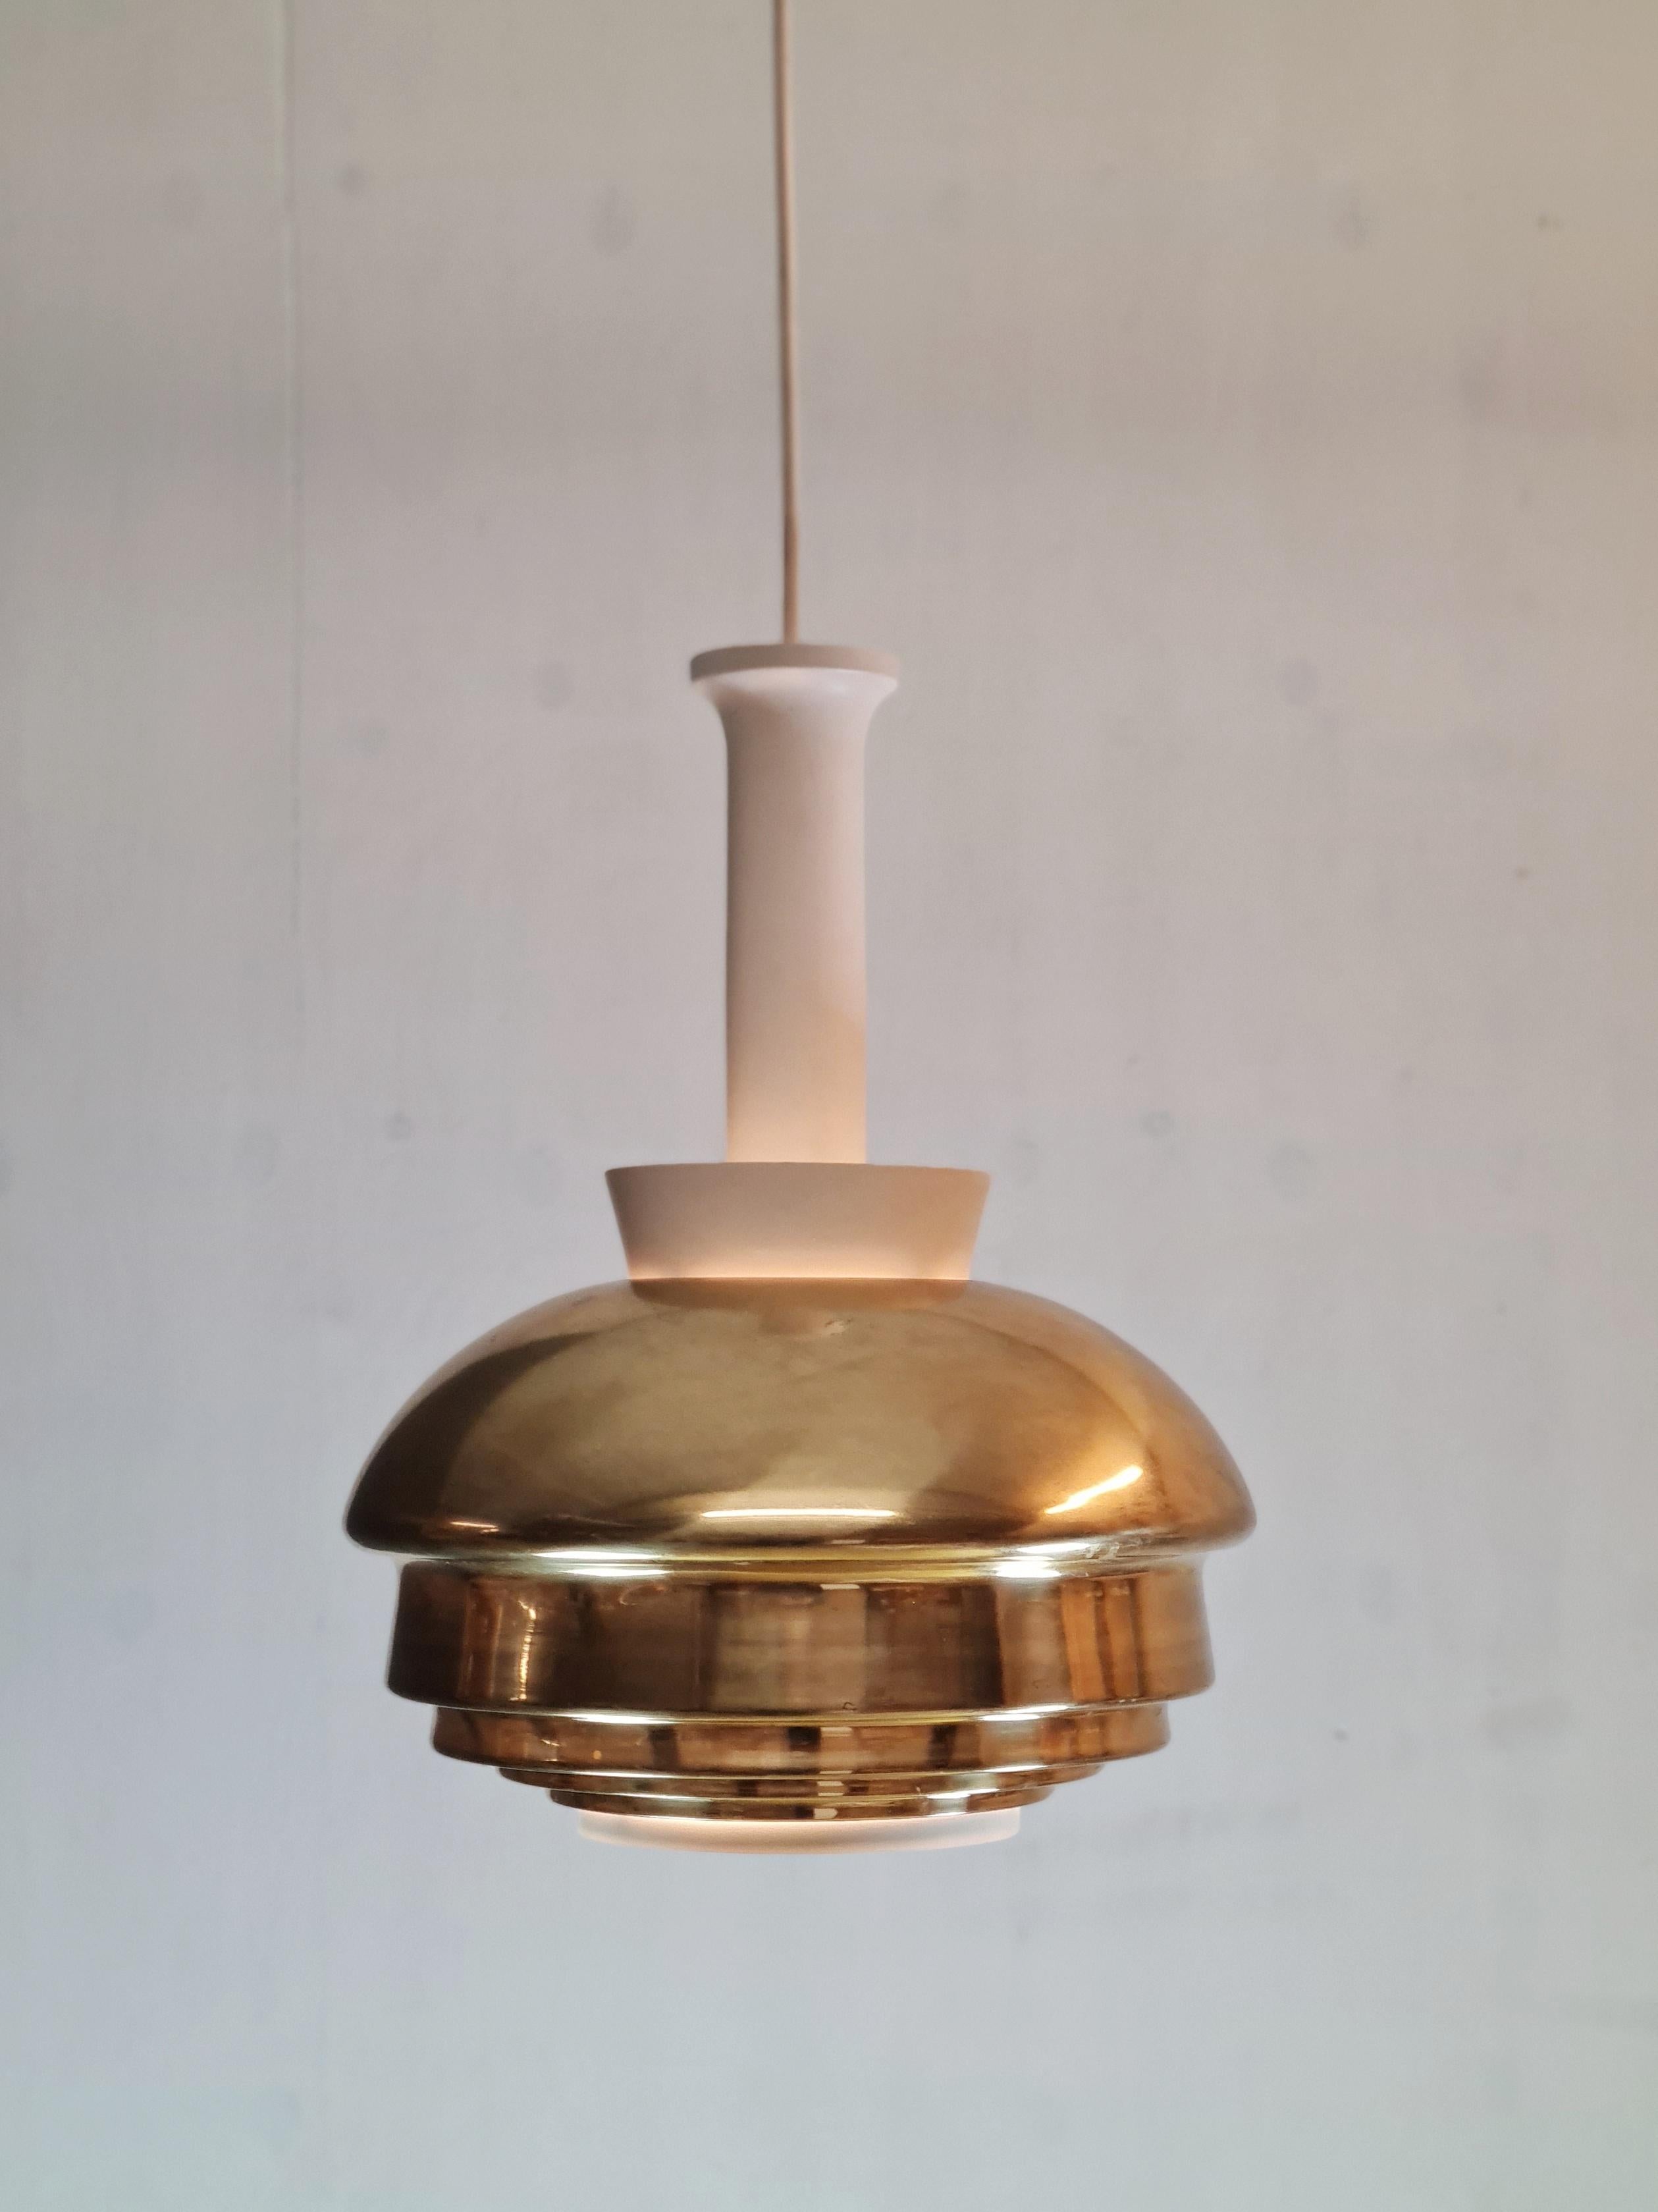 As Alvar Aalto often took his inspiration from his surrounding nature, this layered design creates an eye-pleasing experience. In addition to the details which make the light appear quite beautiful, the brass dome makes a fresh pair with the white